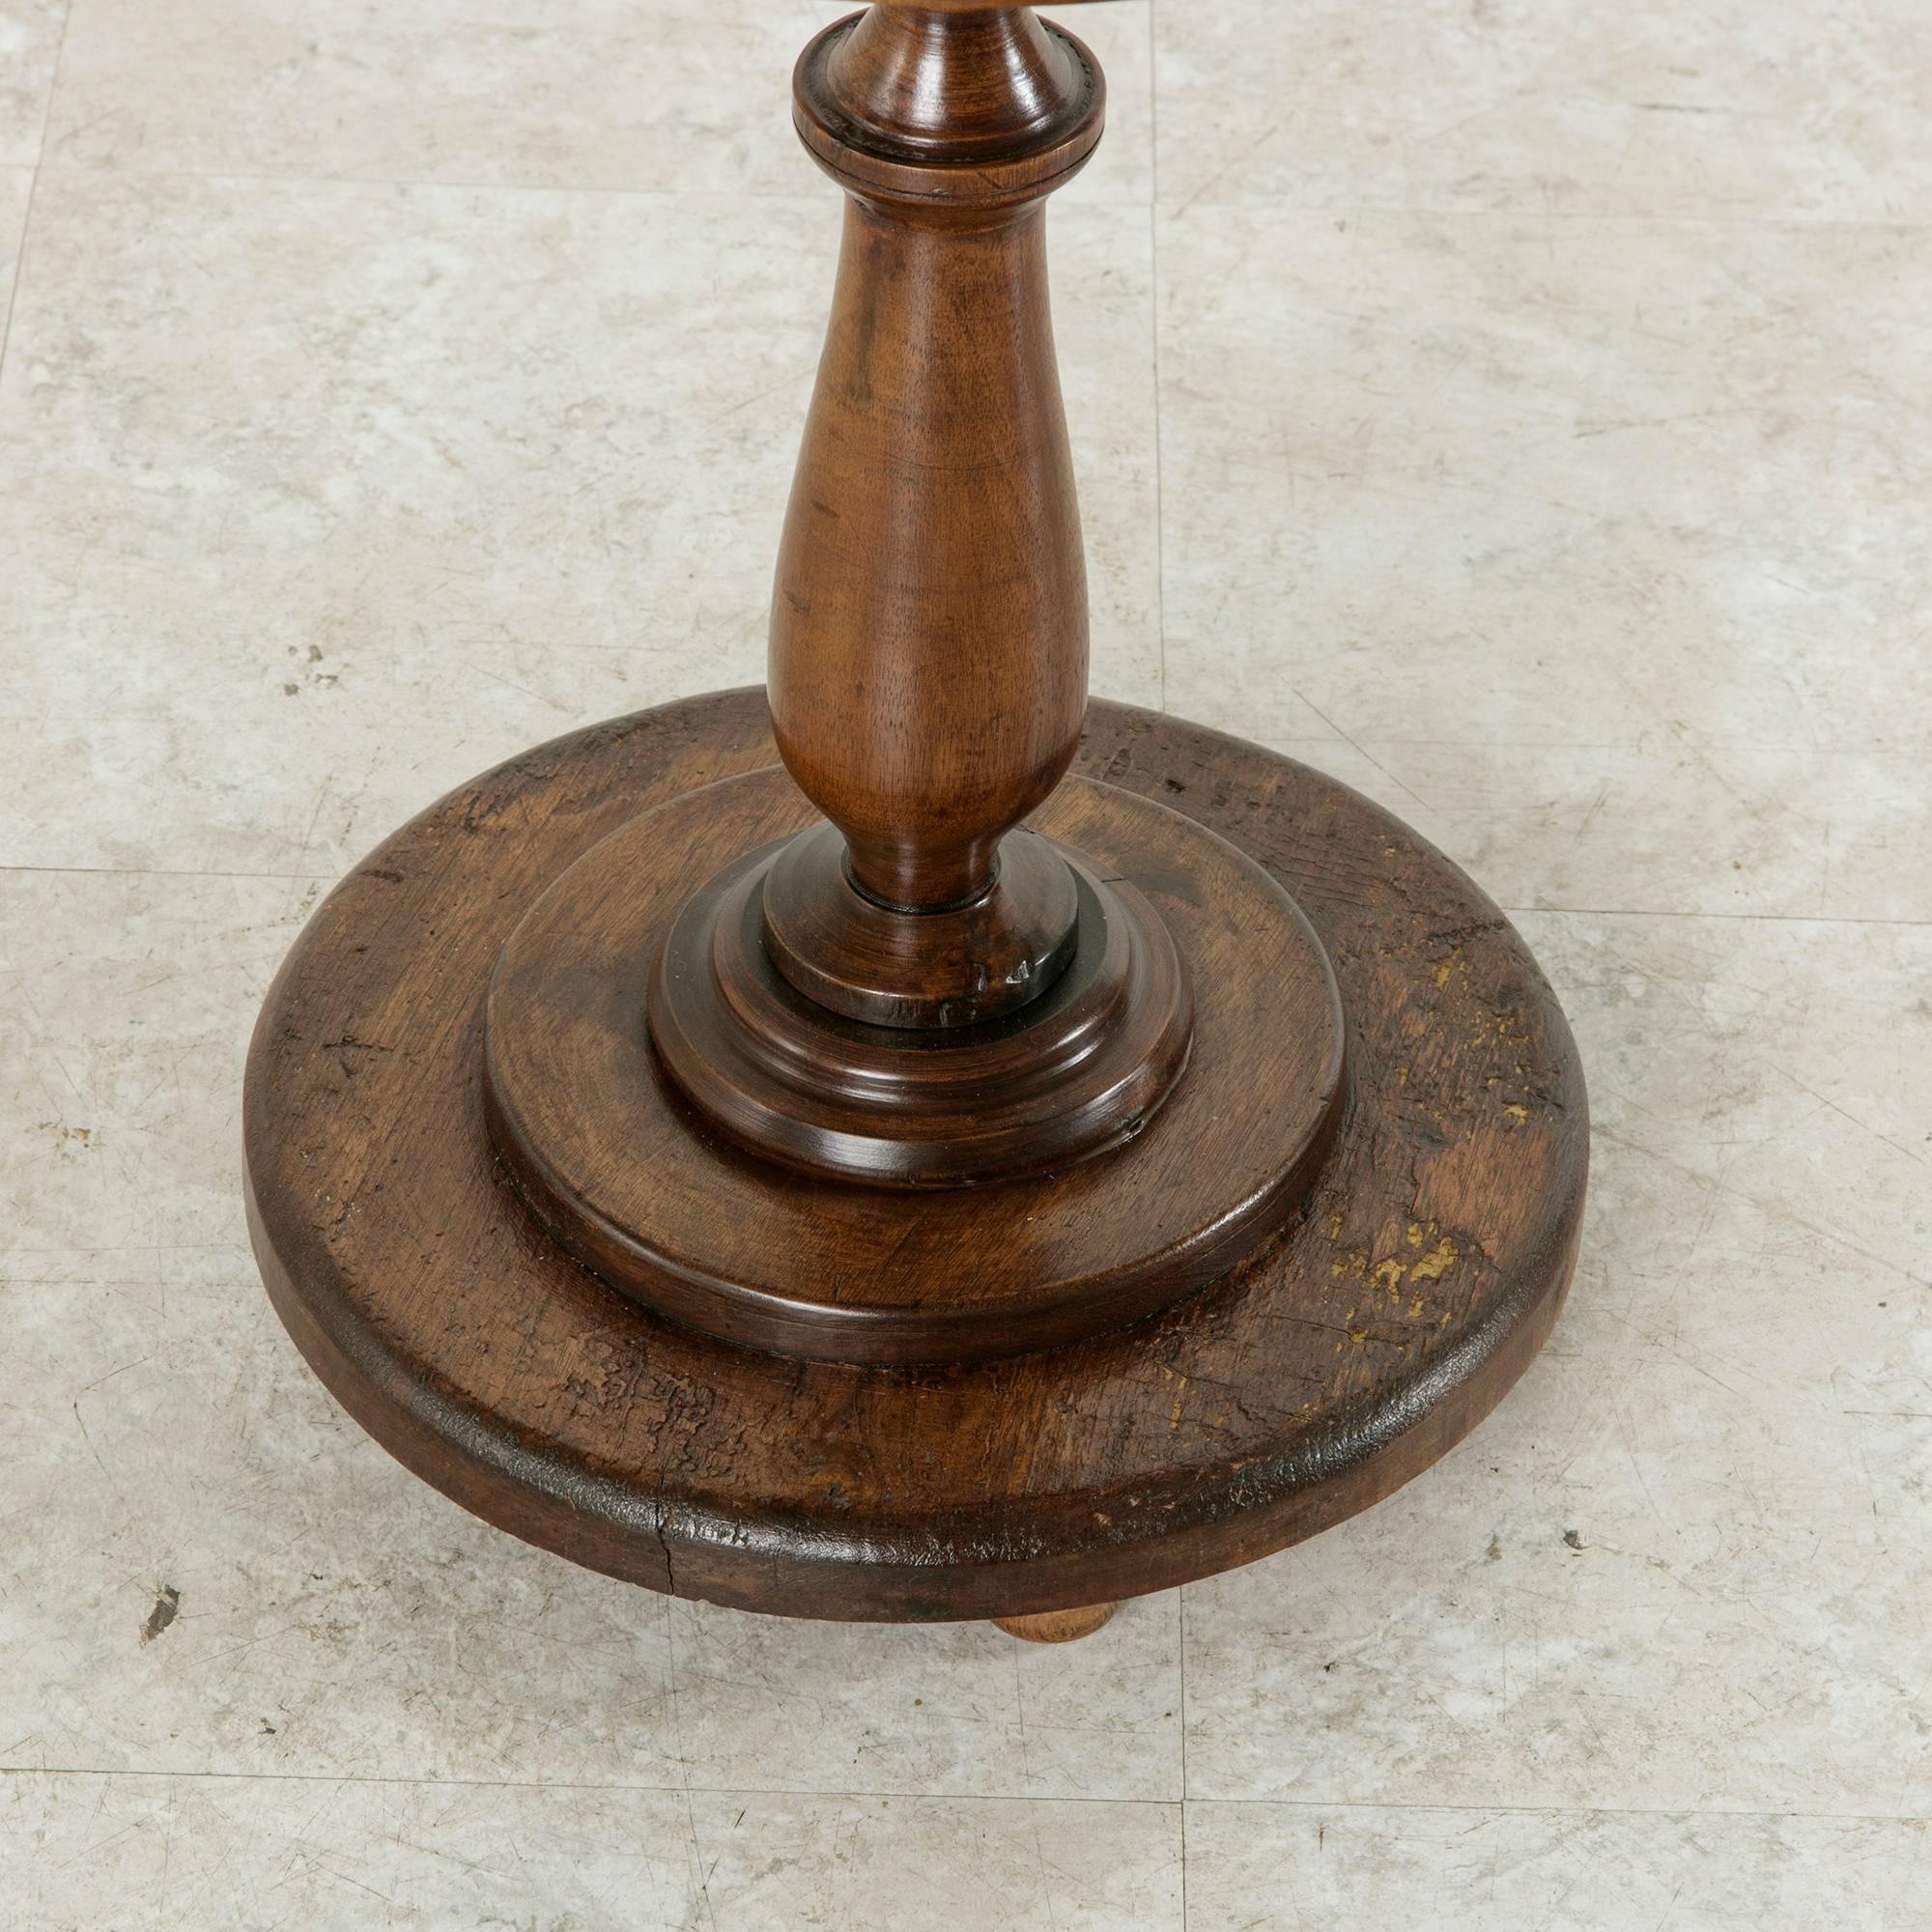 Late 19th Century French Walnut Lace Maker's Table, Pedestal, or Sculpture Stand 4